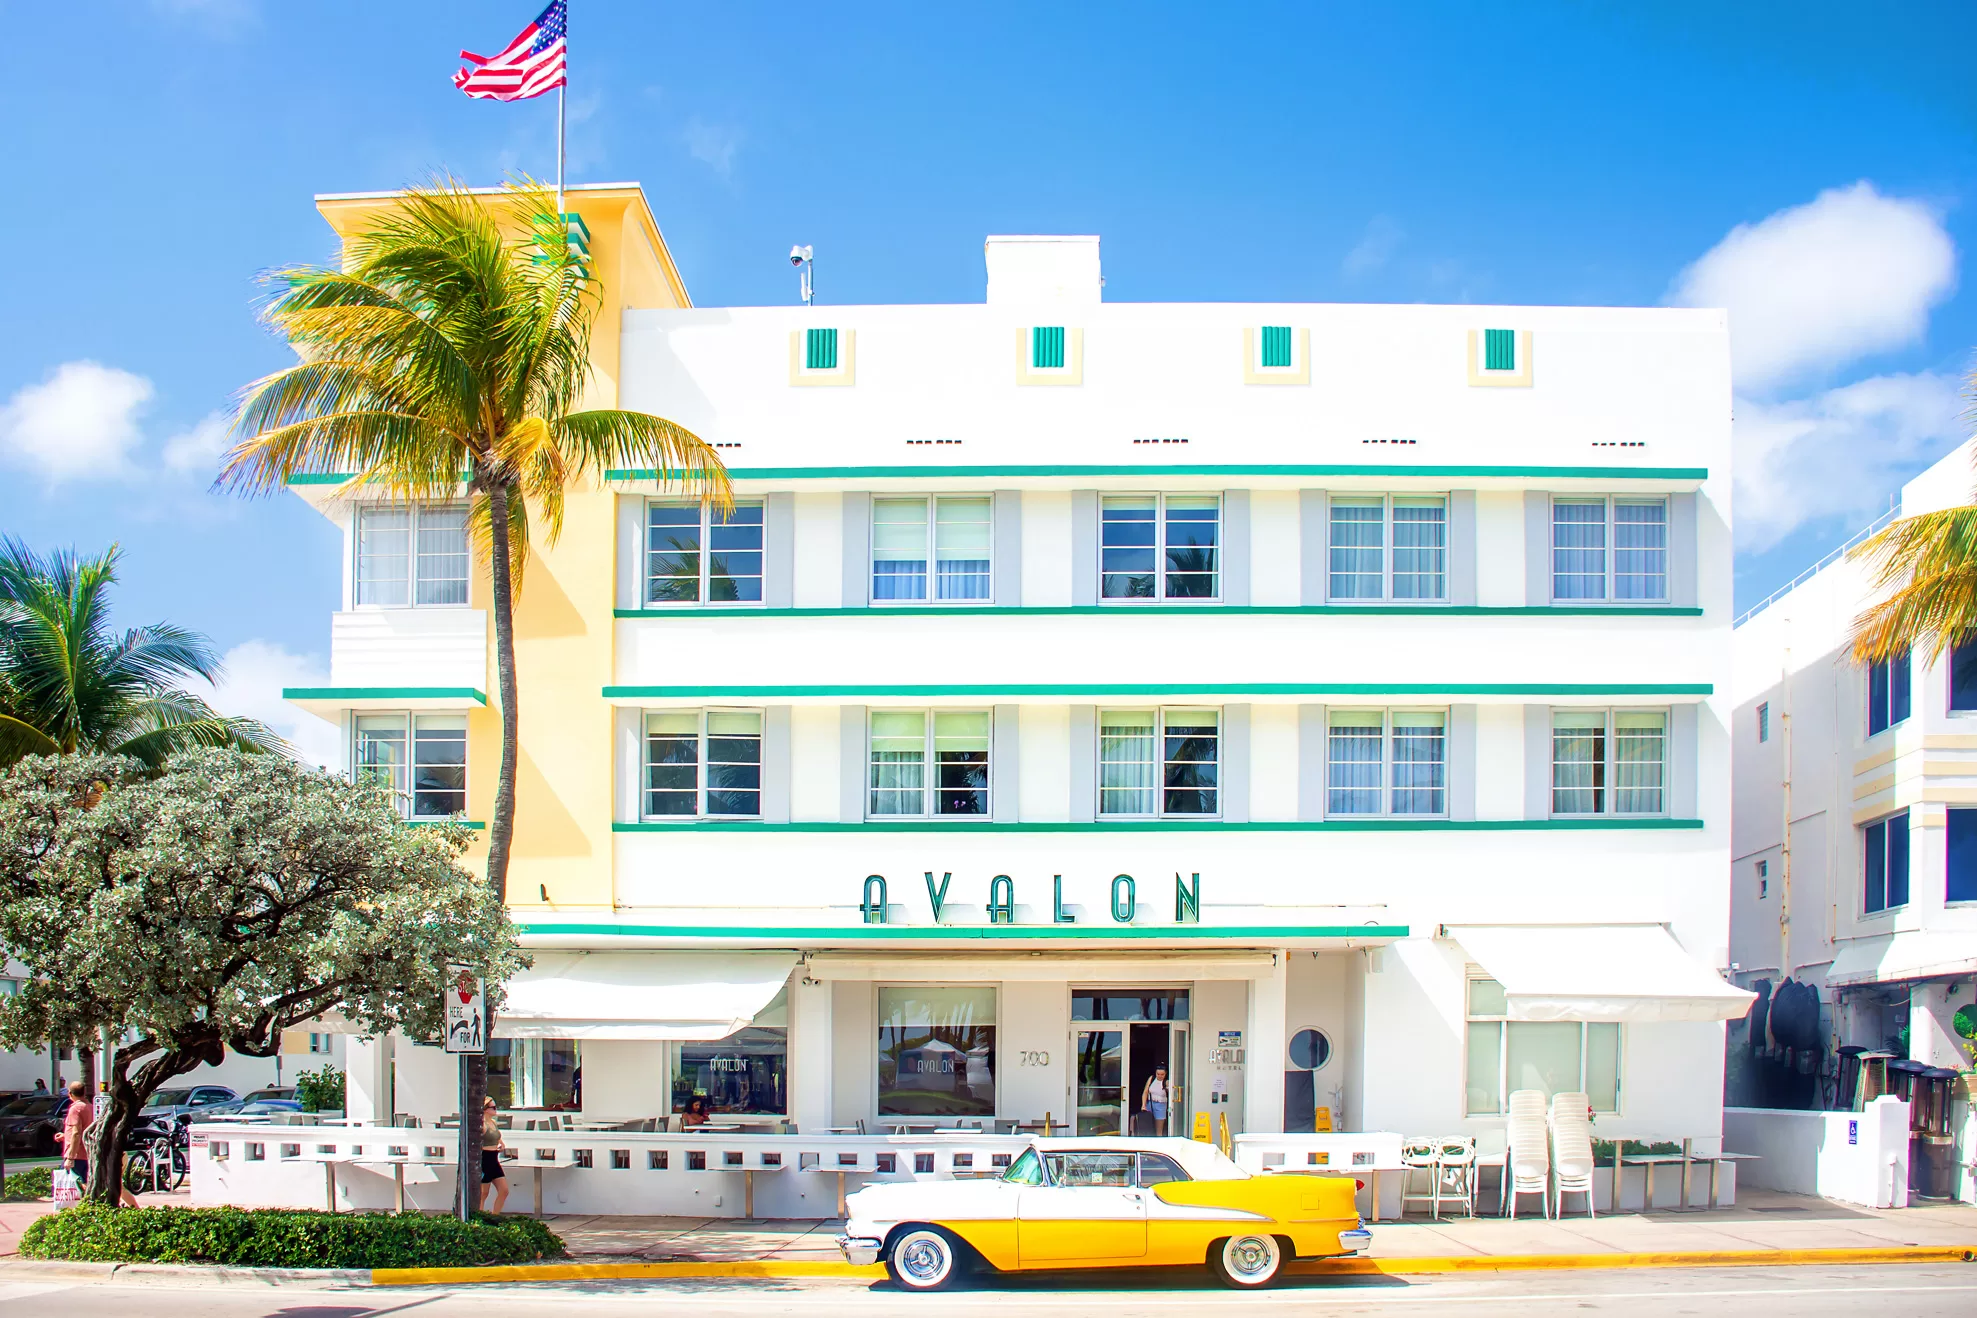 south beach miami avalon hotel with classic car out front